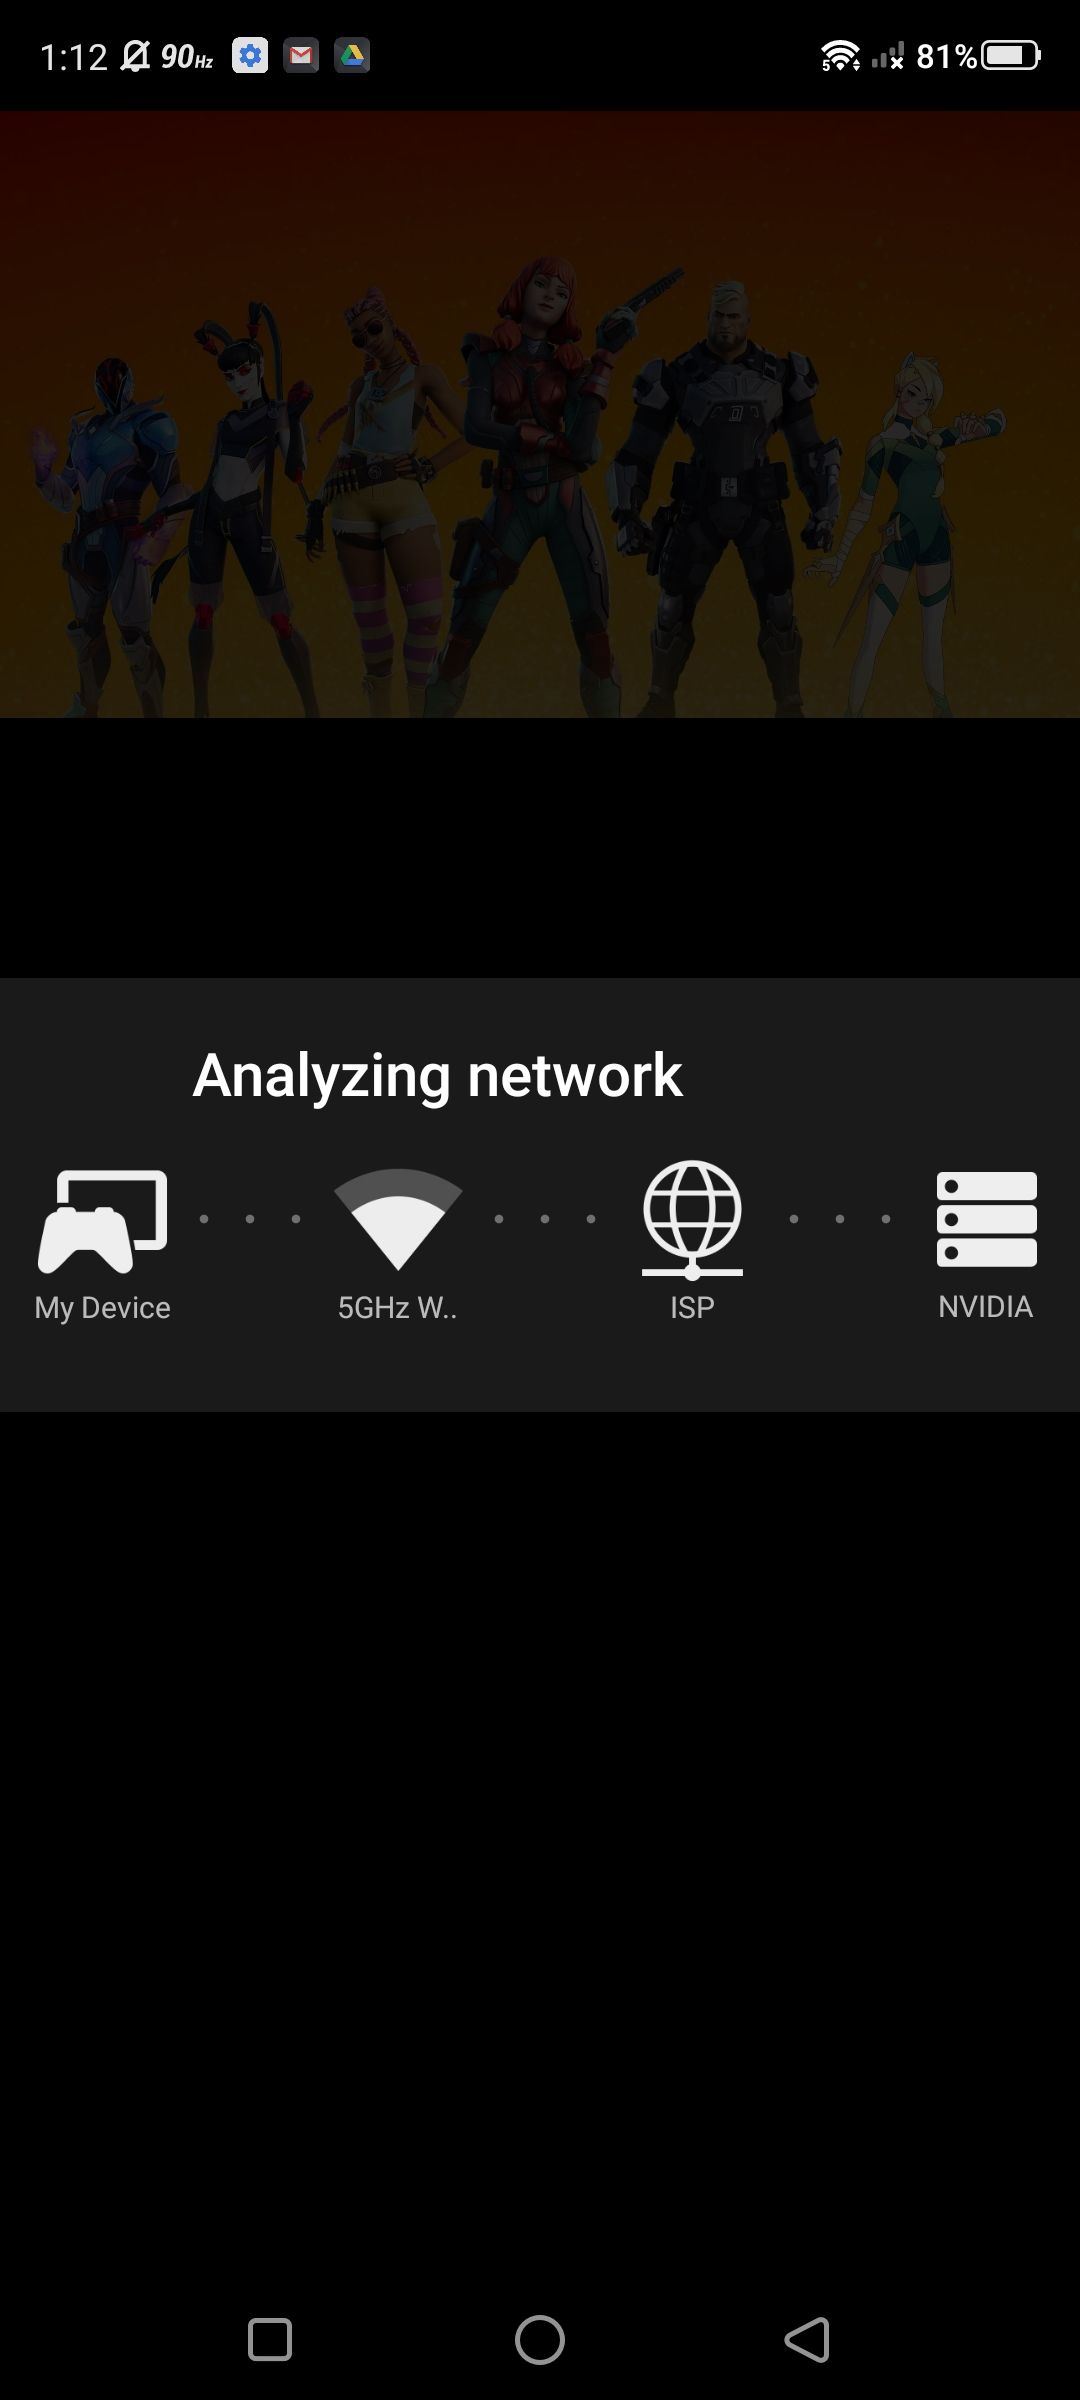 Analyzing network window while loading Fortnite on GeForce Now